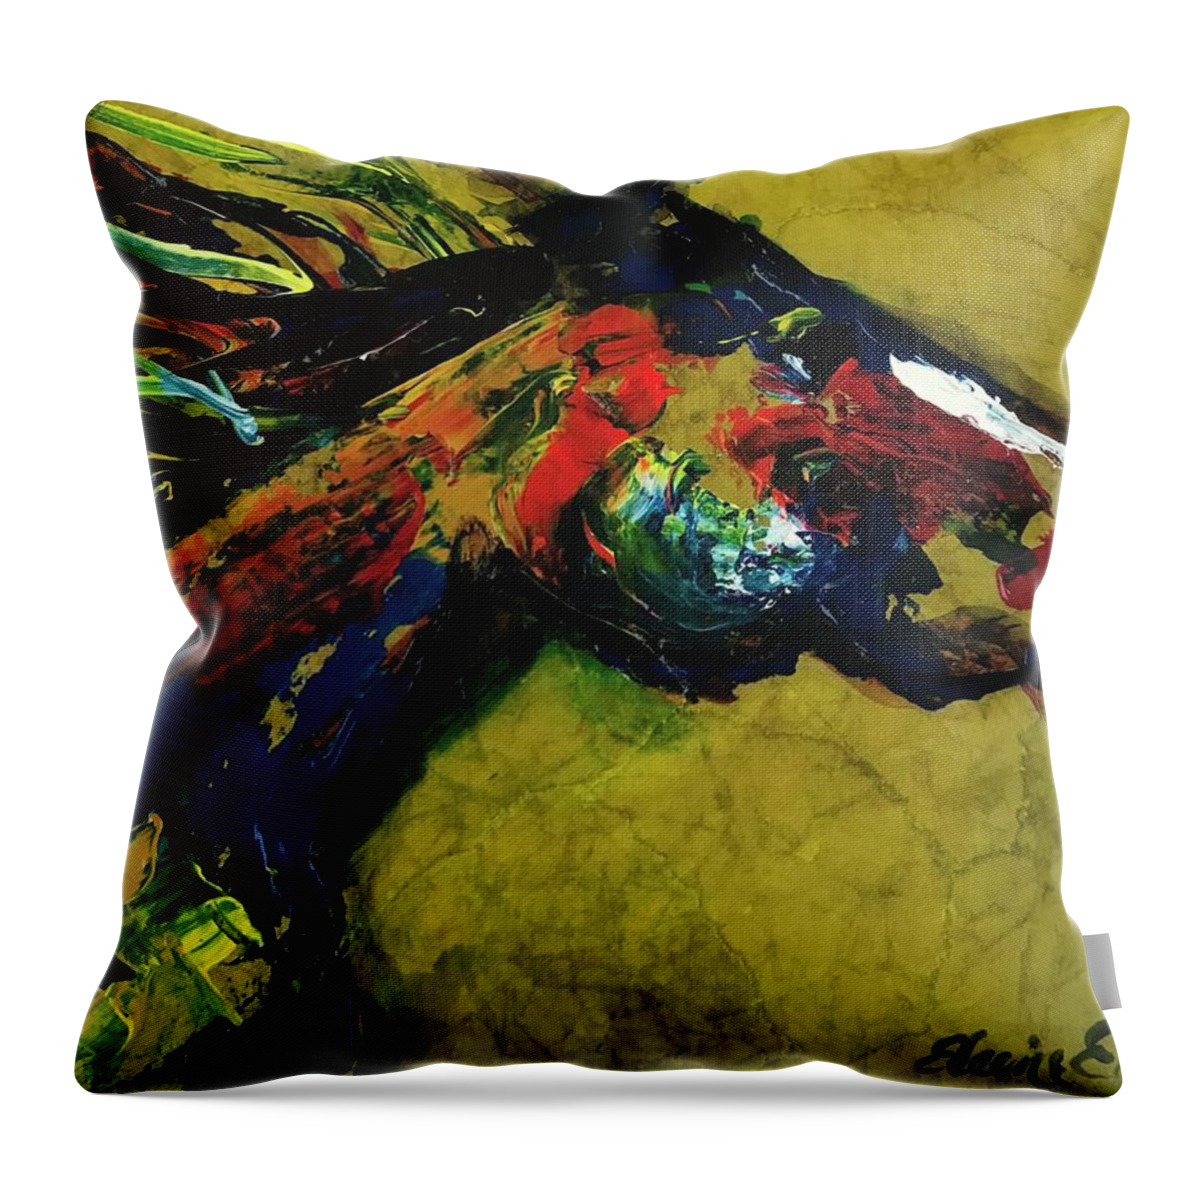 Horses Throw Pillow featuring the painting Running Horse by Elaine Elliott